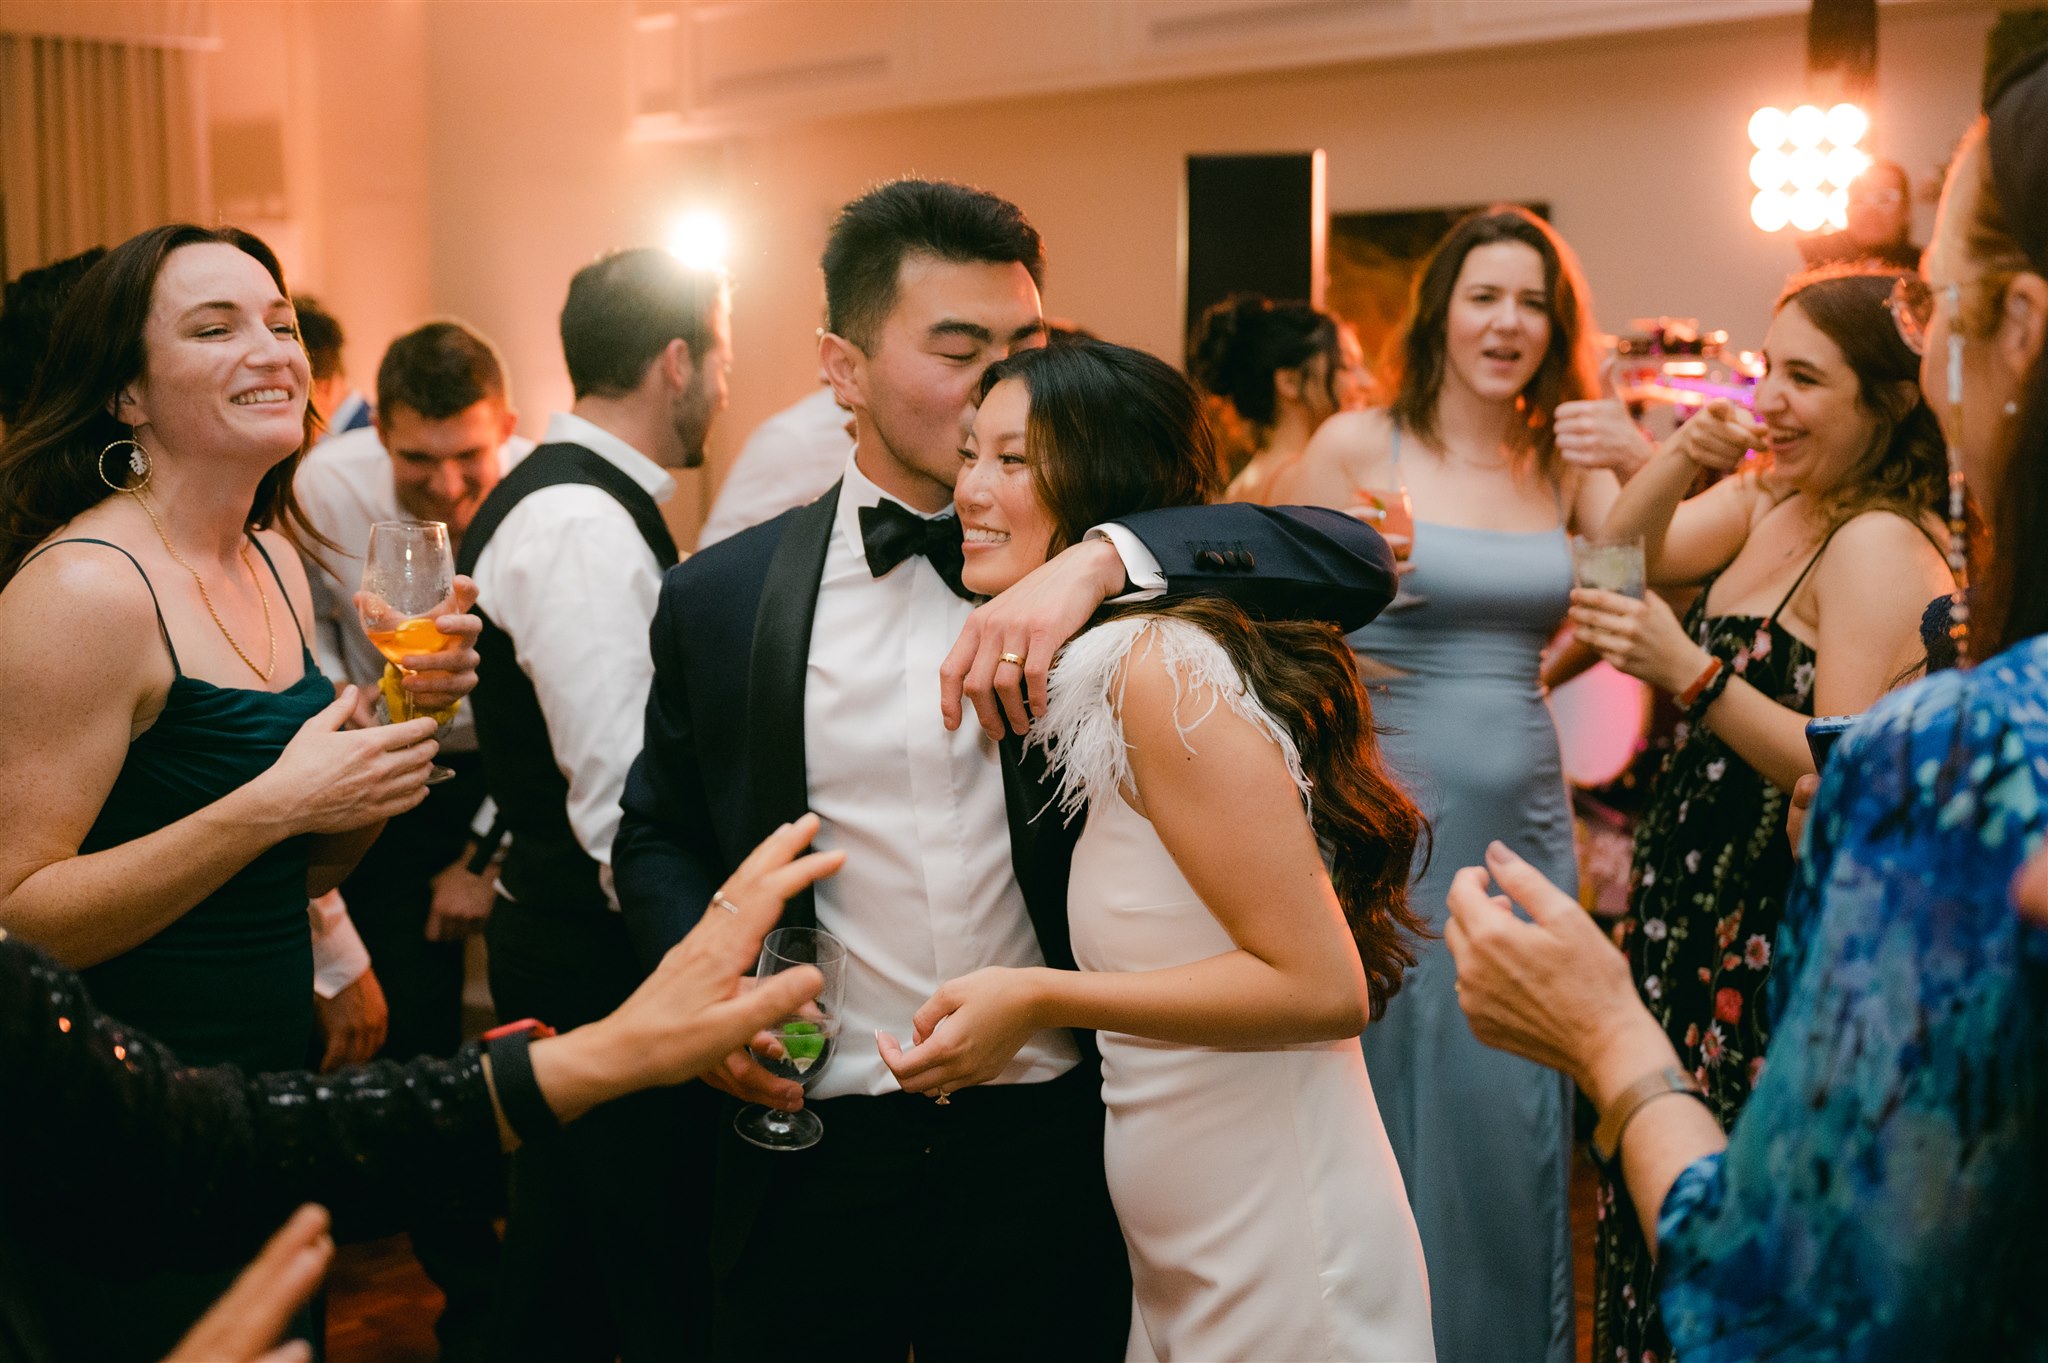 wedding dance party bride and groom kiss middle of dancefloor after party bridal wedding dress inspiration